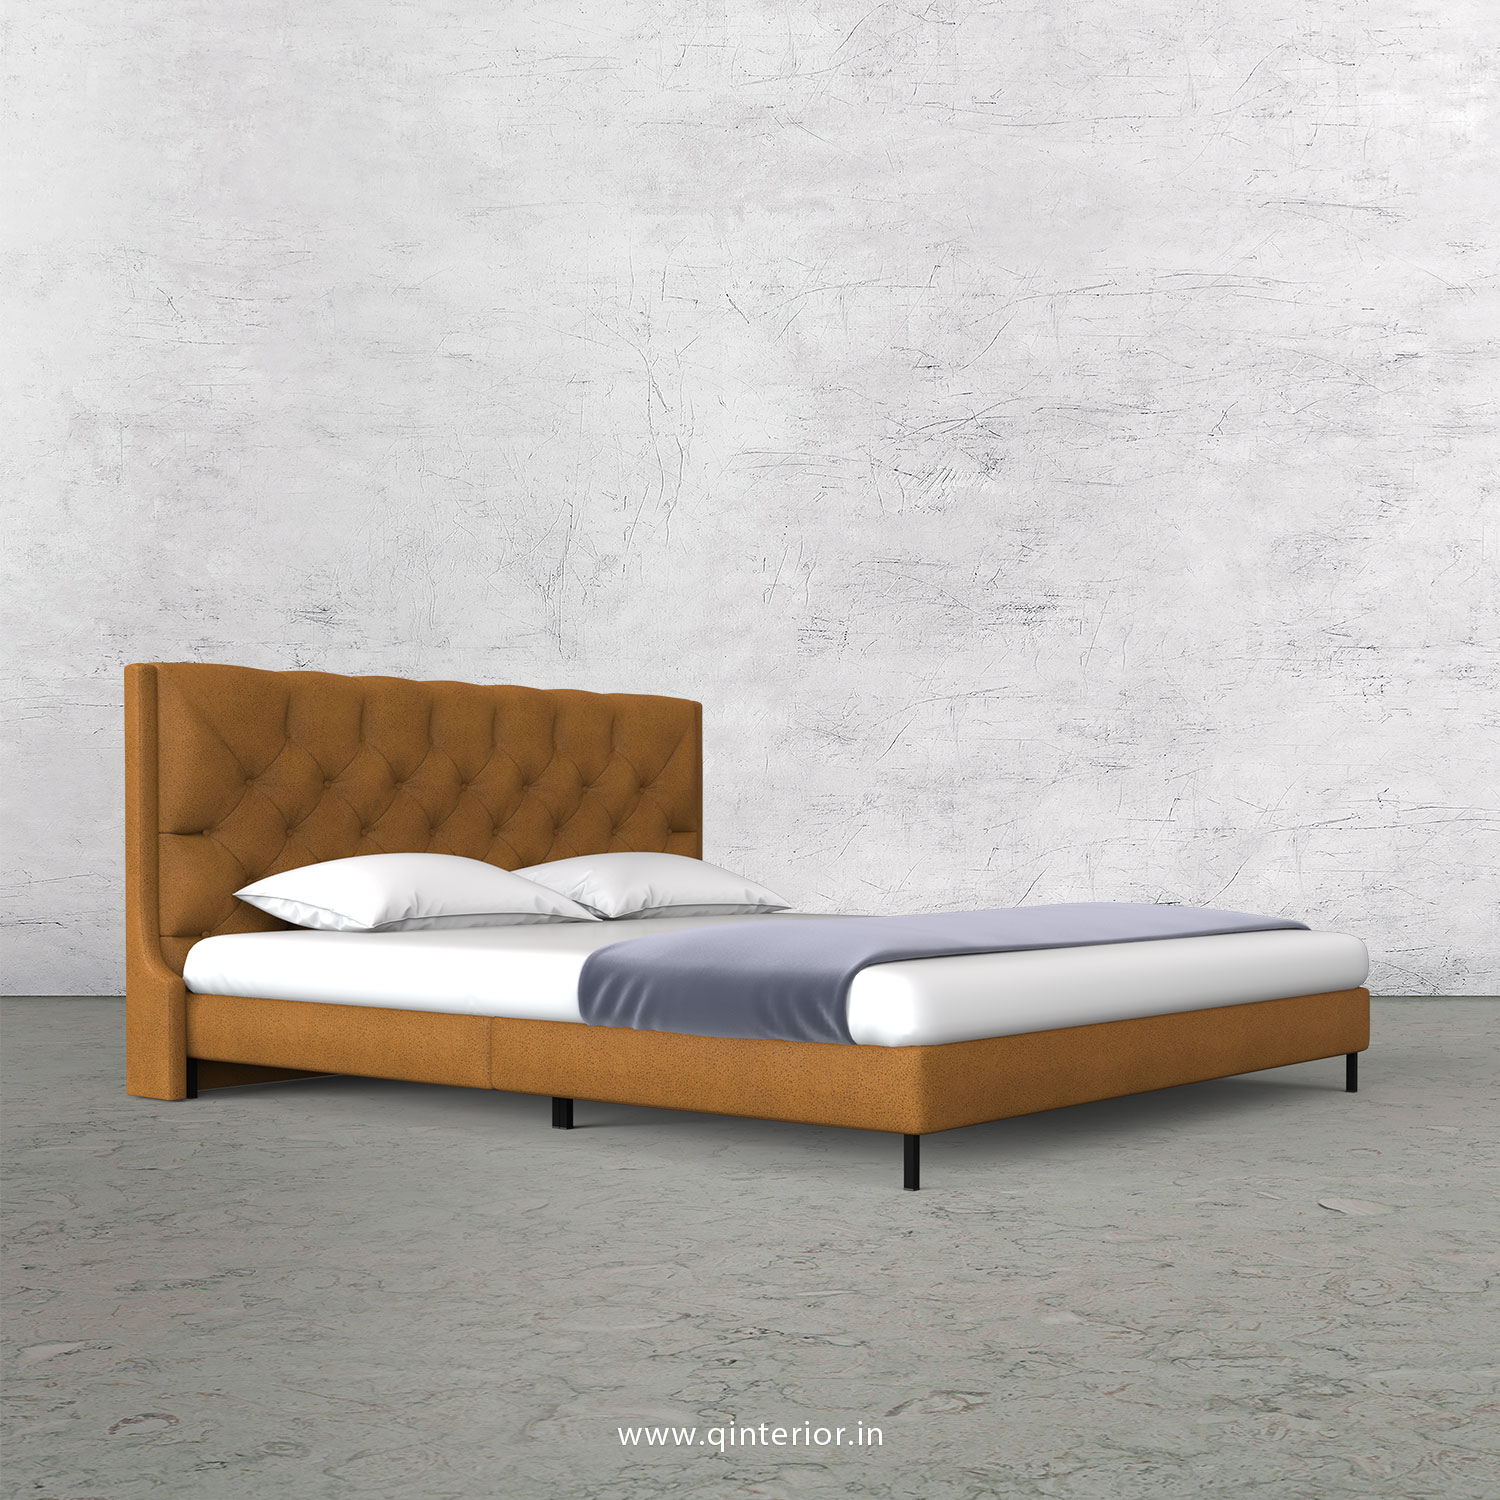 Scorpius King Size Bed in Fab Leather Fabric - KBD003 FL14